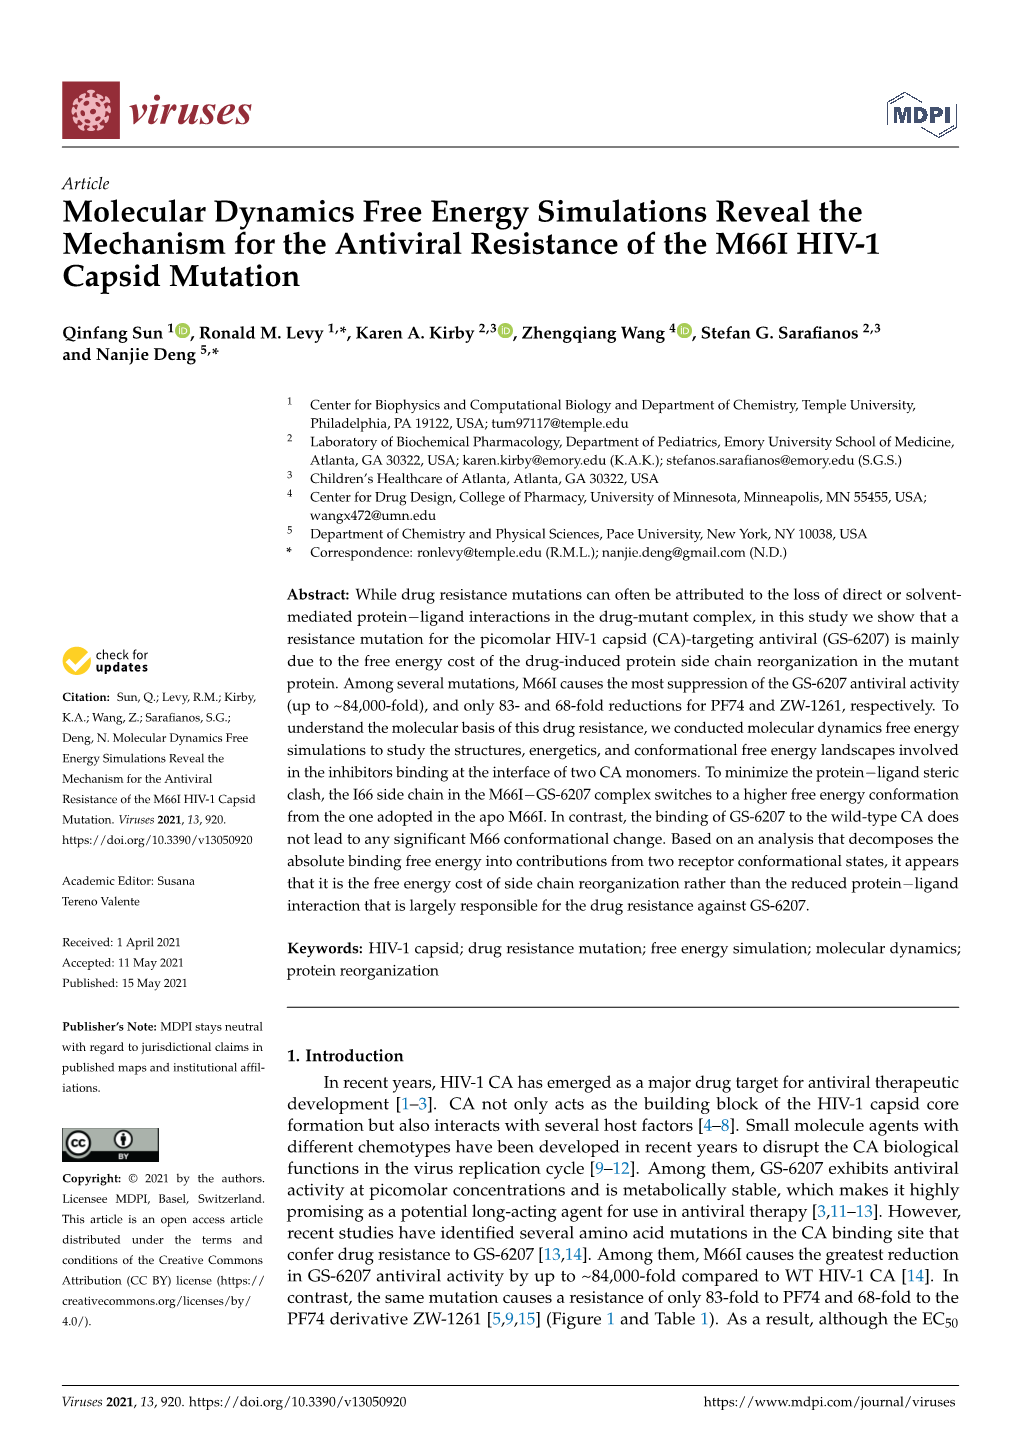 Molecular Dynamics Free Energy Simulations Reveal the Mechanism for the Antiviral Resistance of the M66I HIV-1 Capsid Mutation